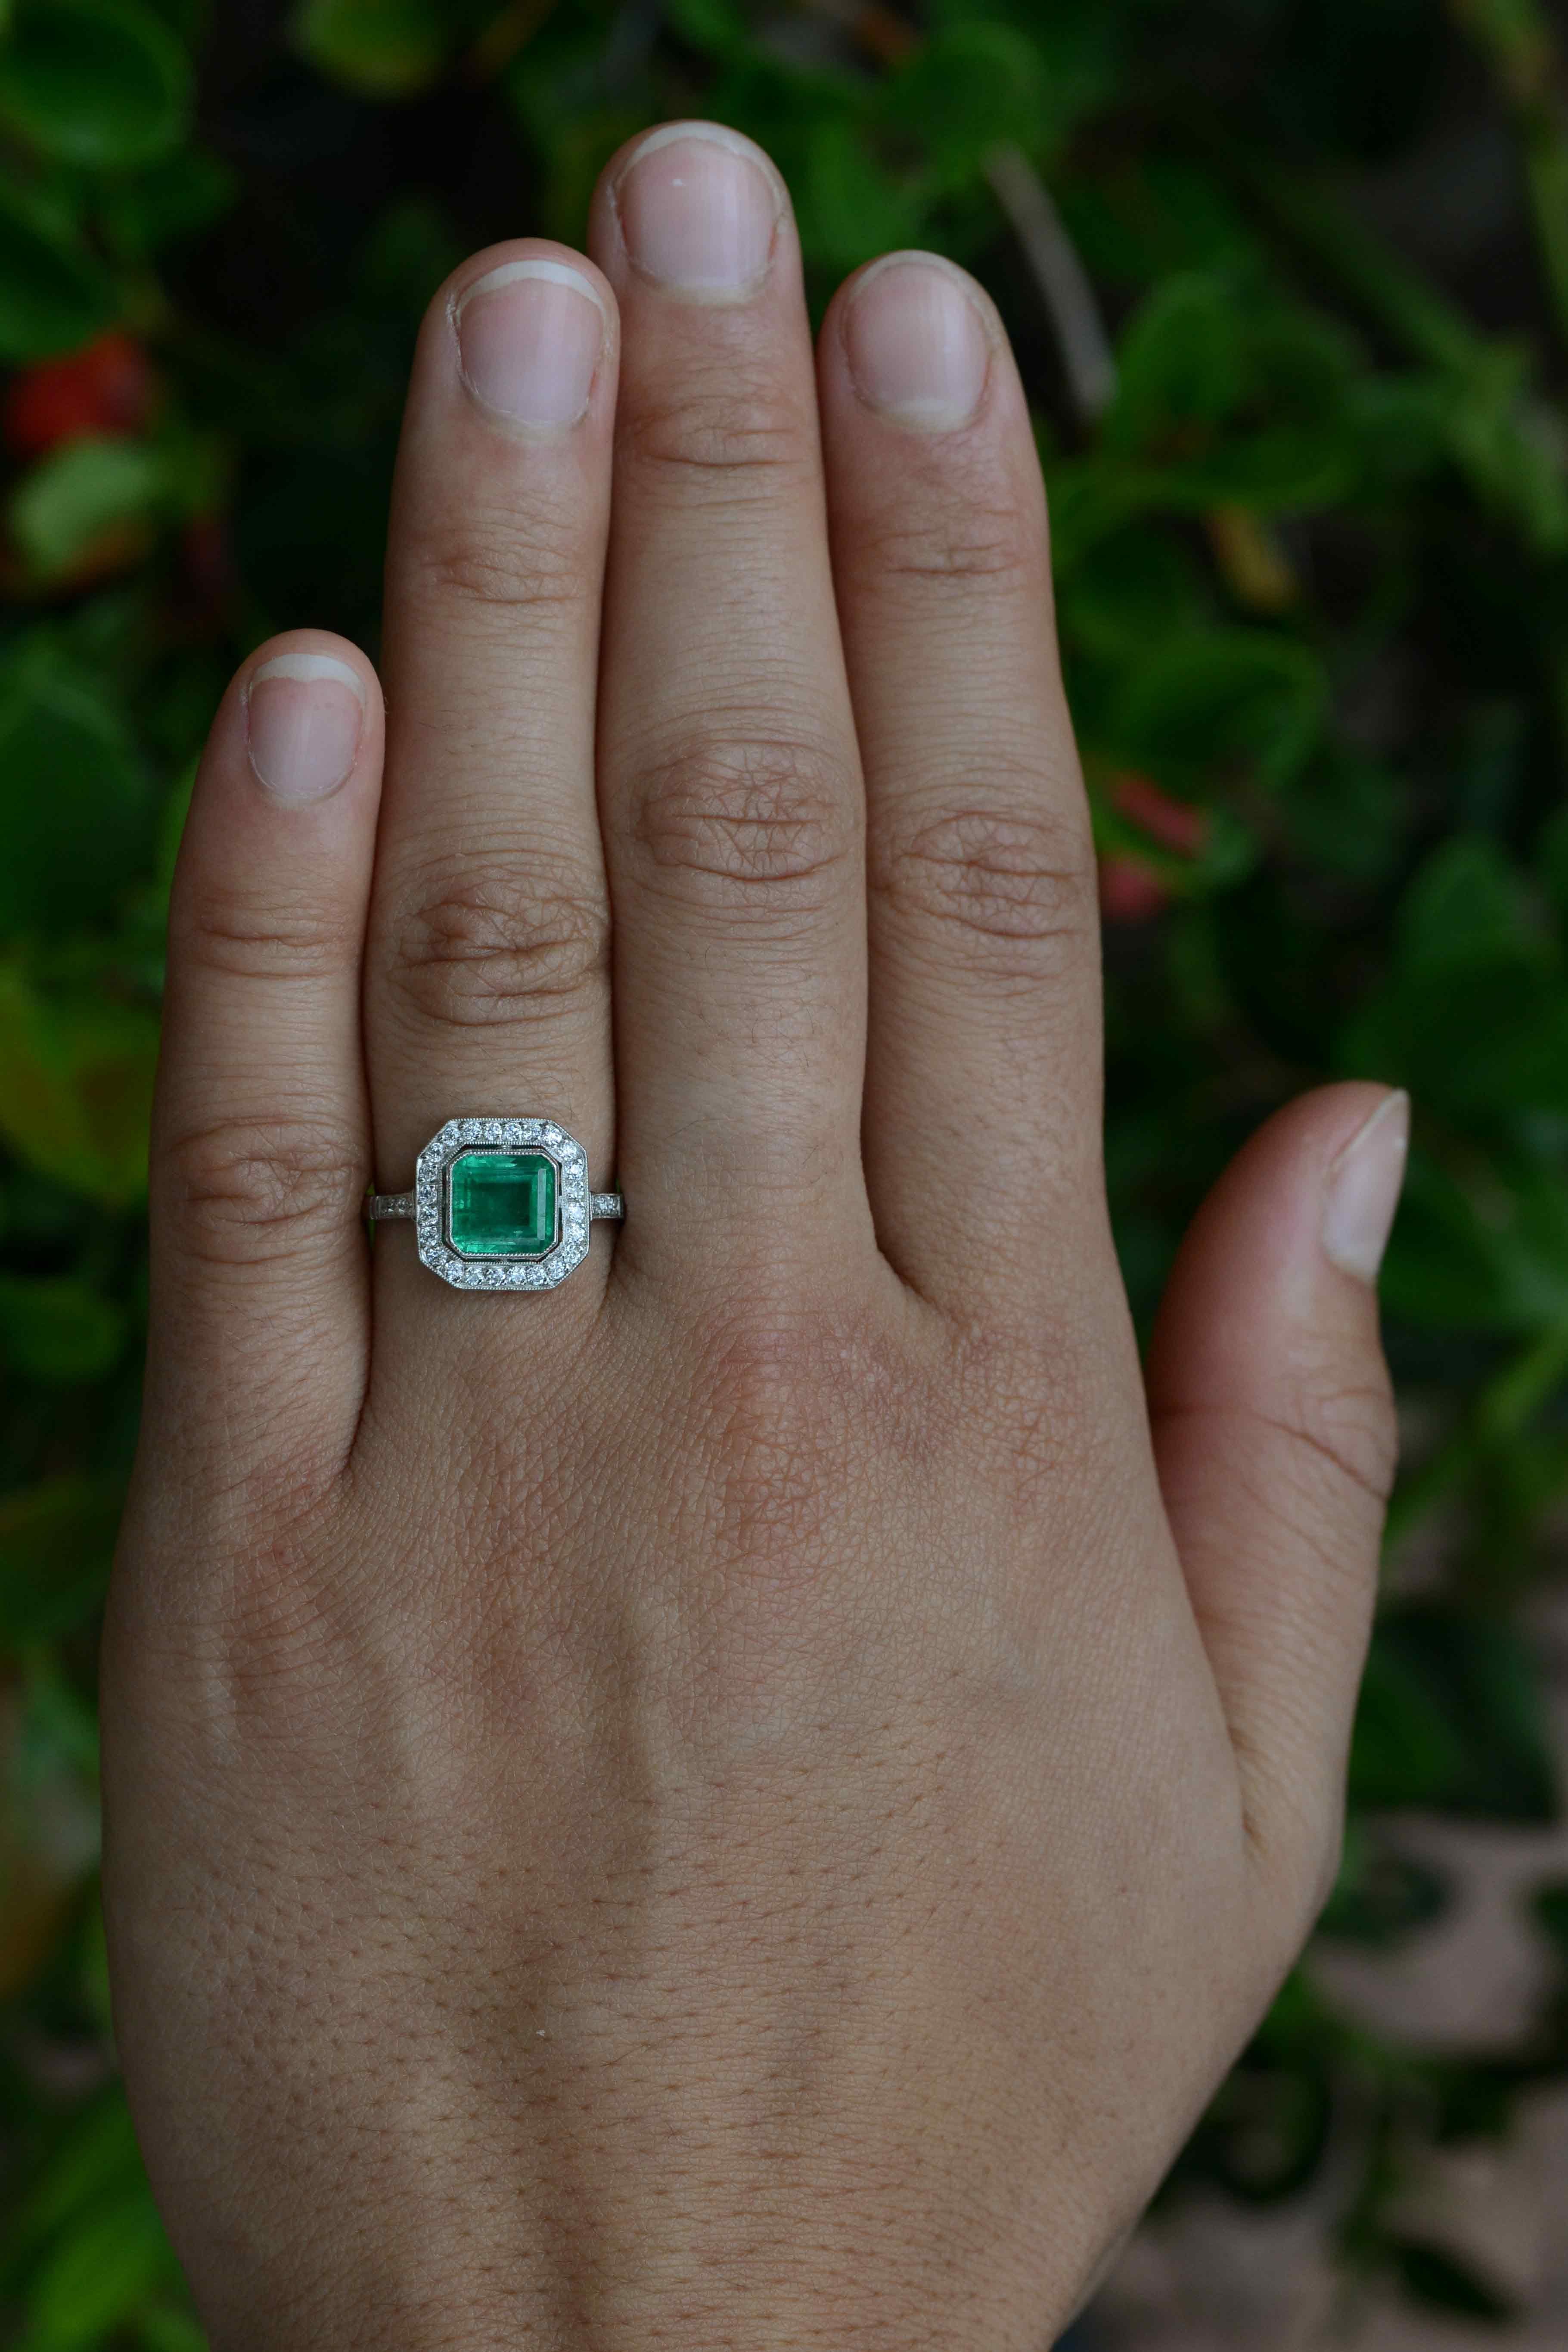 A breathtaking grass-green Colombian emerald takes center stage in this striking Art Deco style emerald engagement ring. The platinum setting features a sizable 1.56 carat gemstone that glows with light from within its soul. Floating in a milgrain